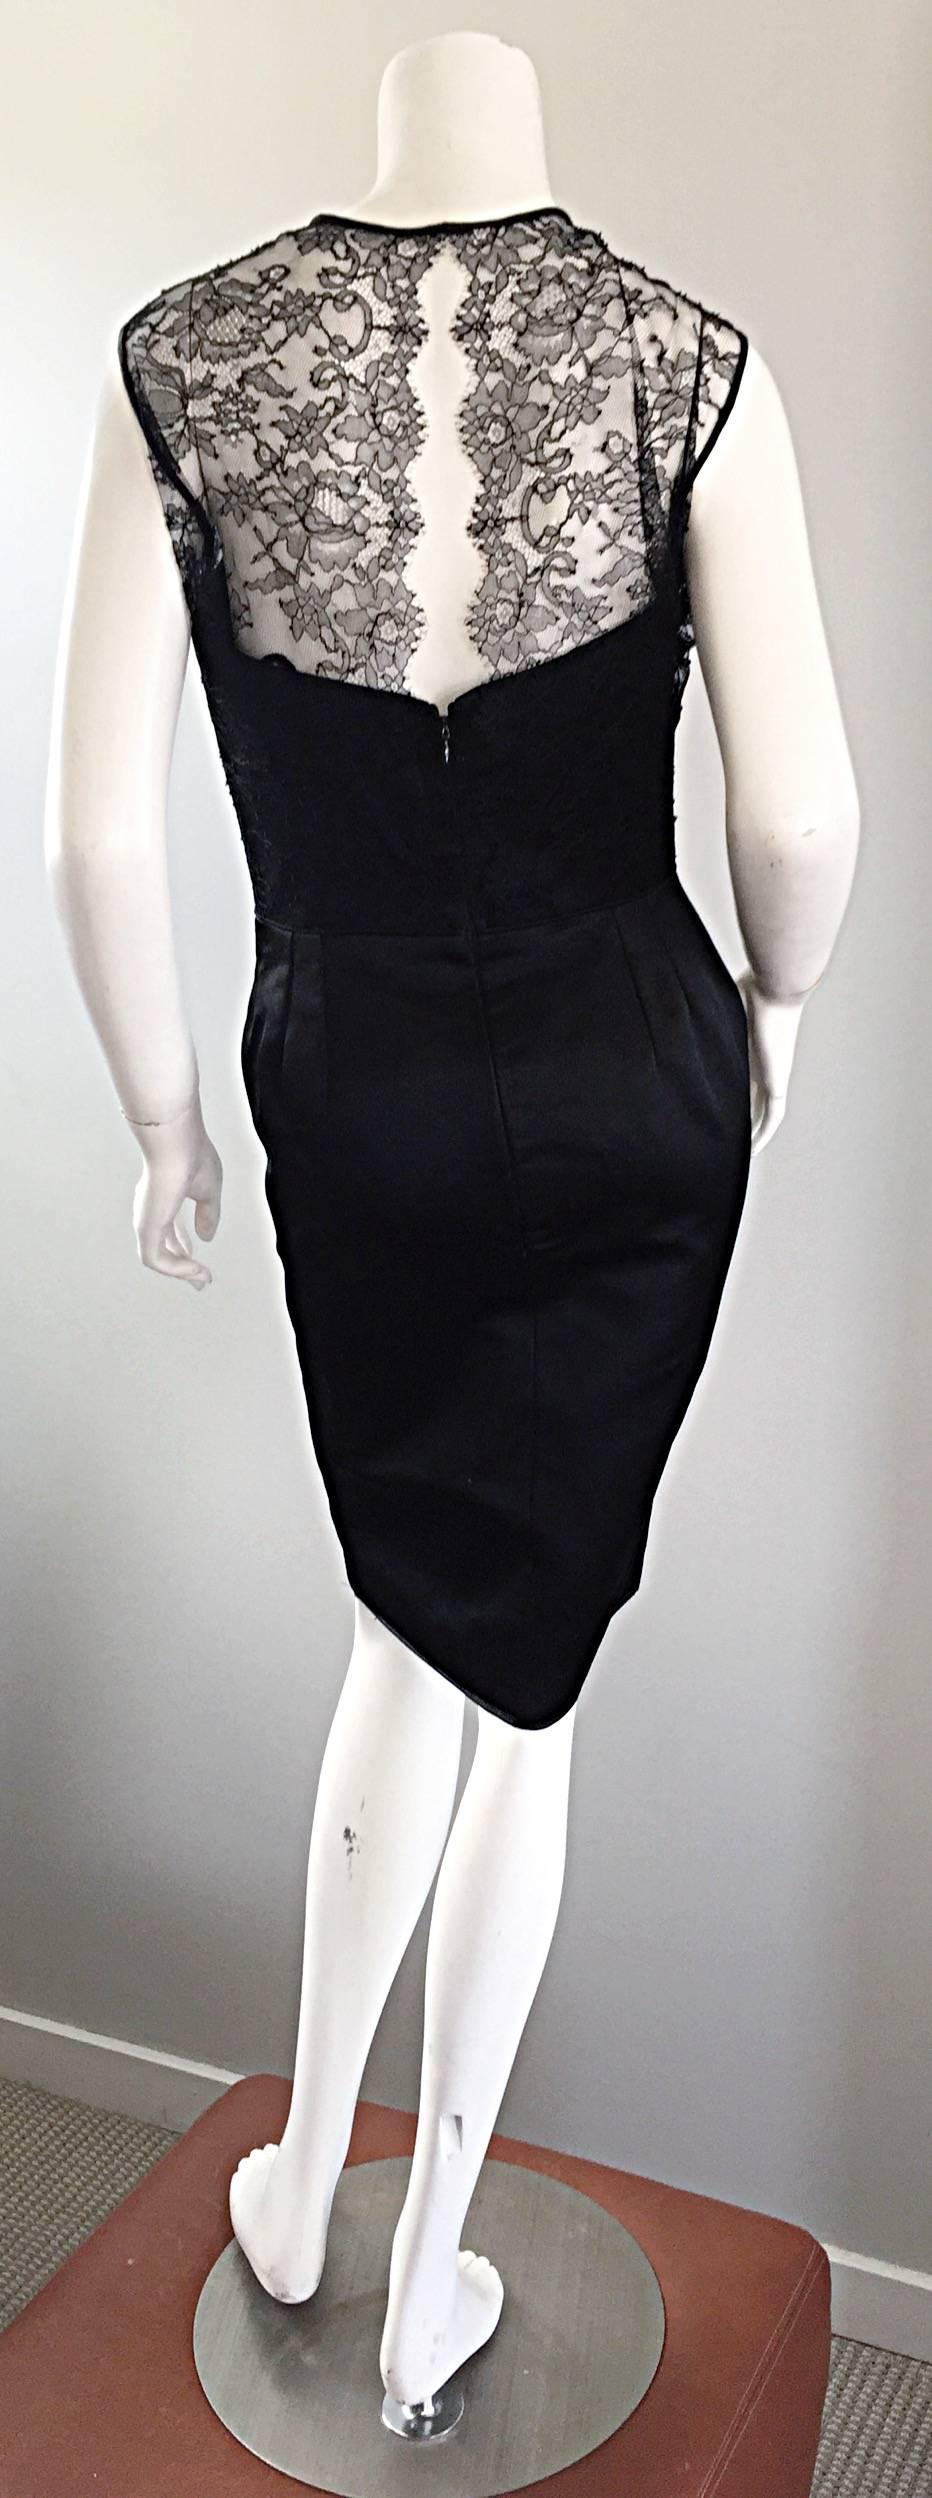 1990s Carlos Marquez Black Silk Vintage 90s Wiggle Dress w/ Lace Overlay LBD In Excellent Condition For Sale In San Diego, CA